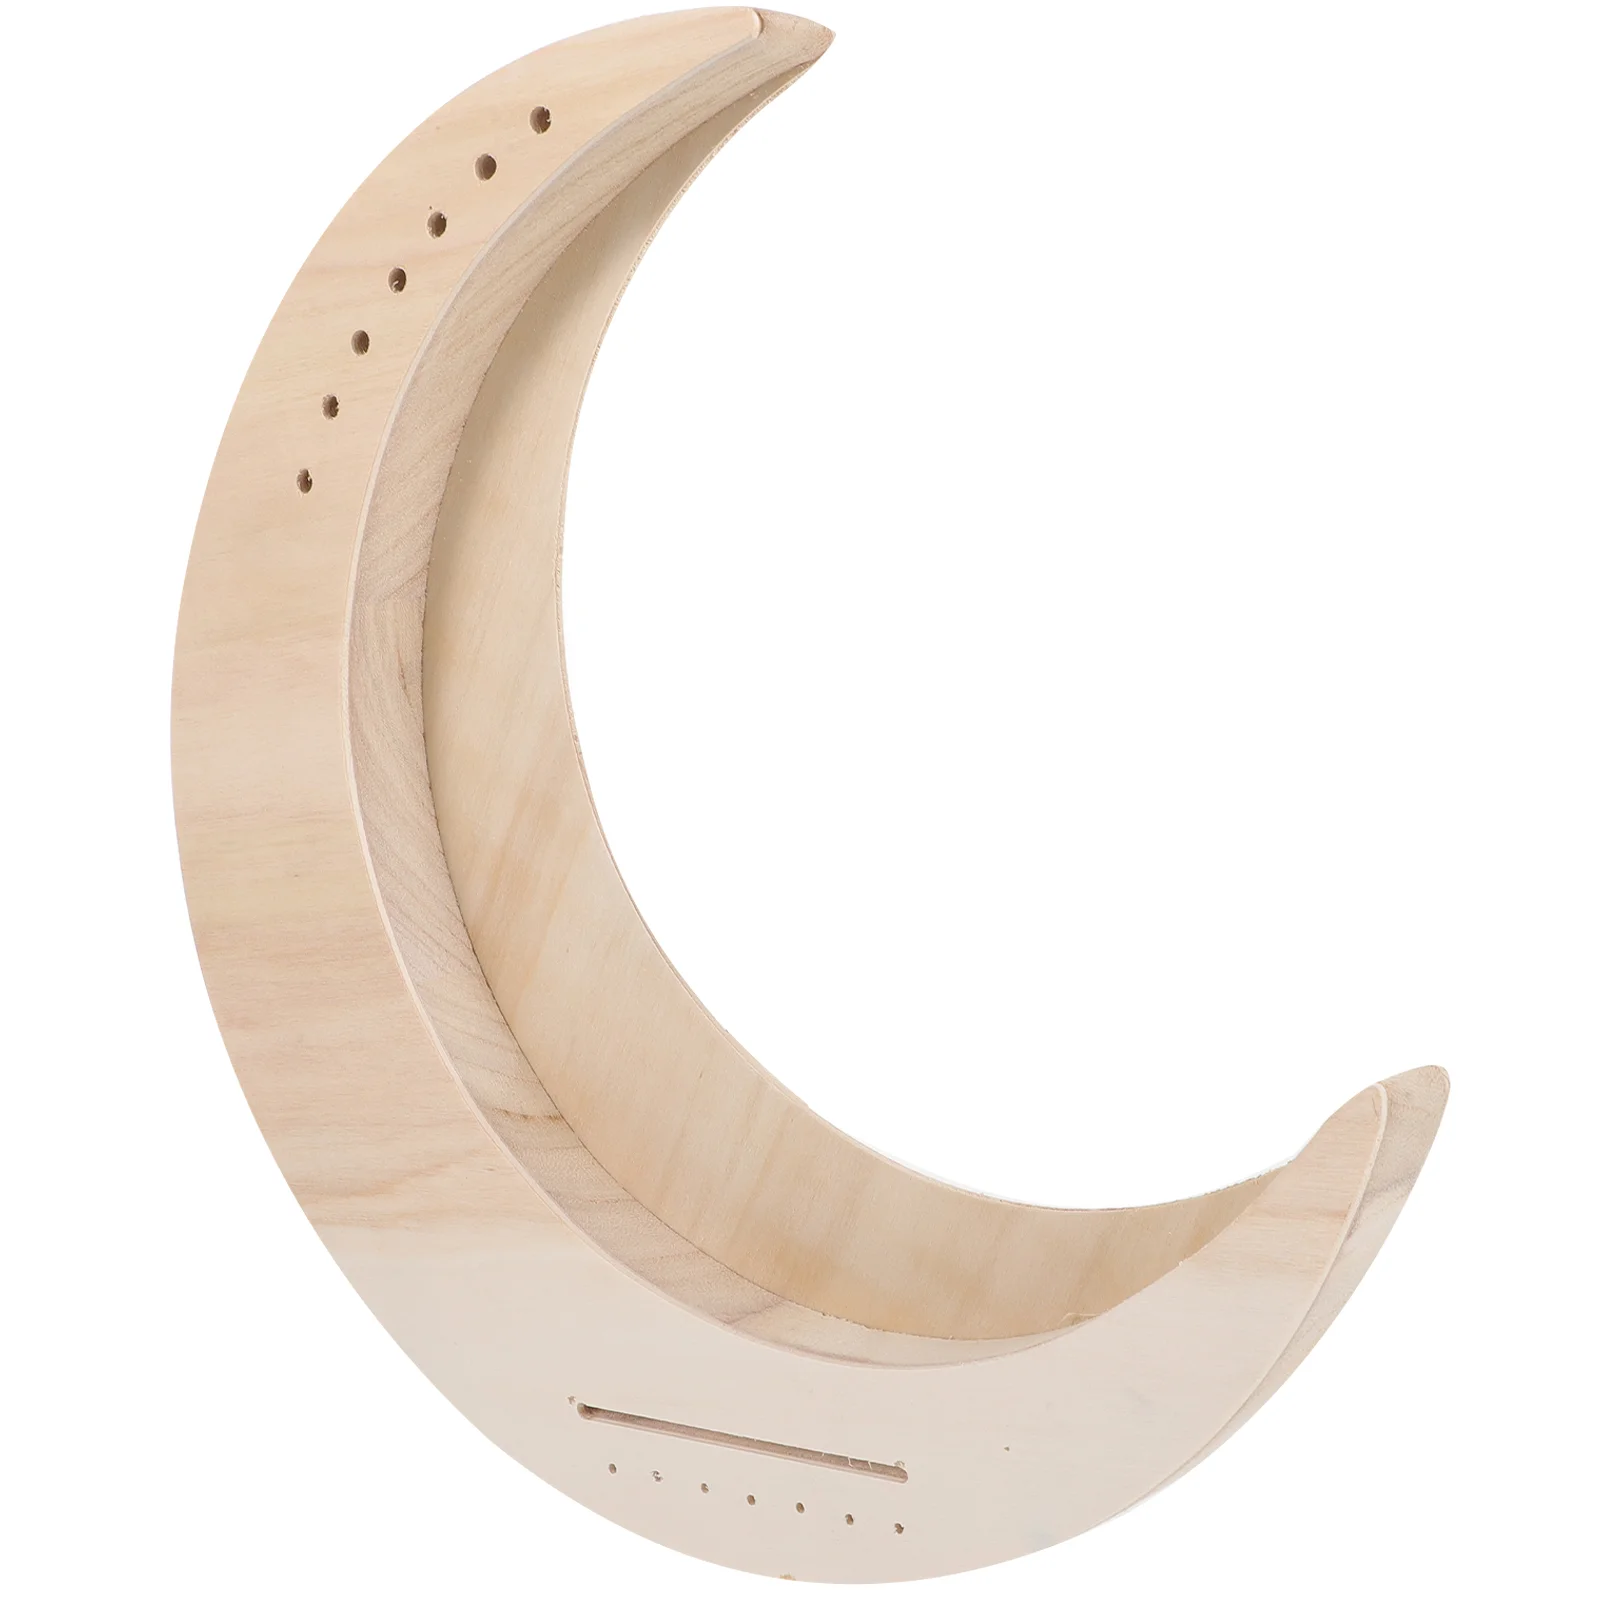 

Wooden Lyre Harp Moon Shape String Musical Instruments With Tuning Wrench For Beginners